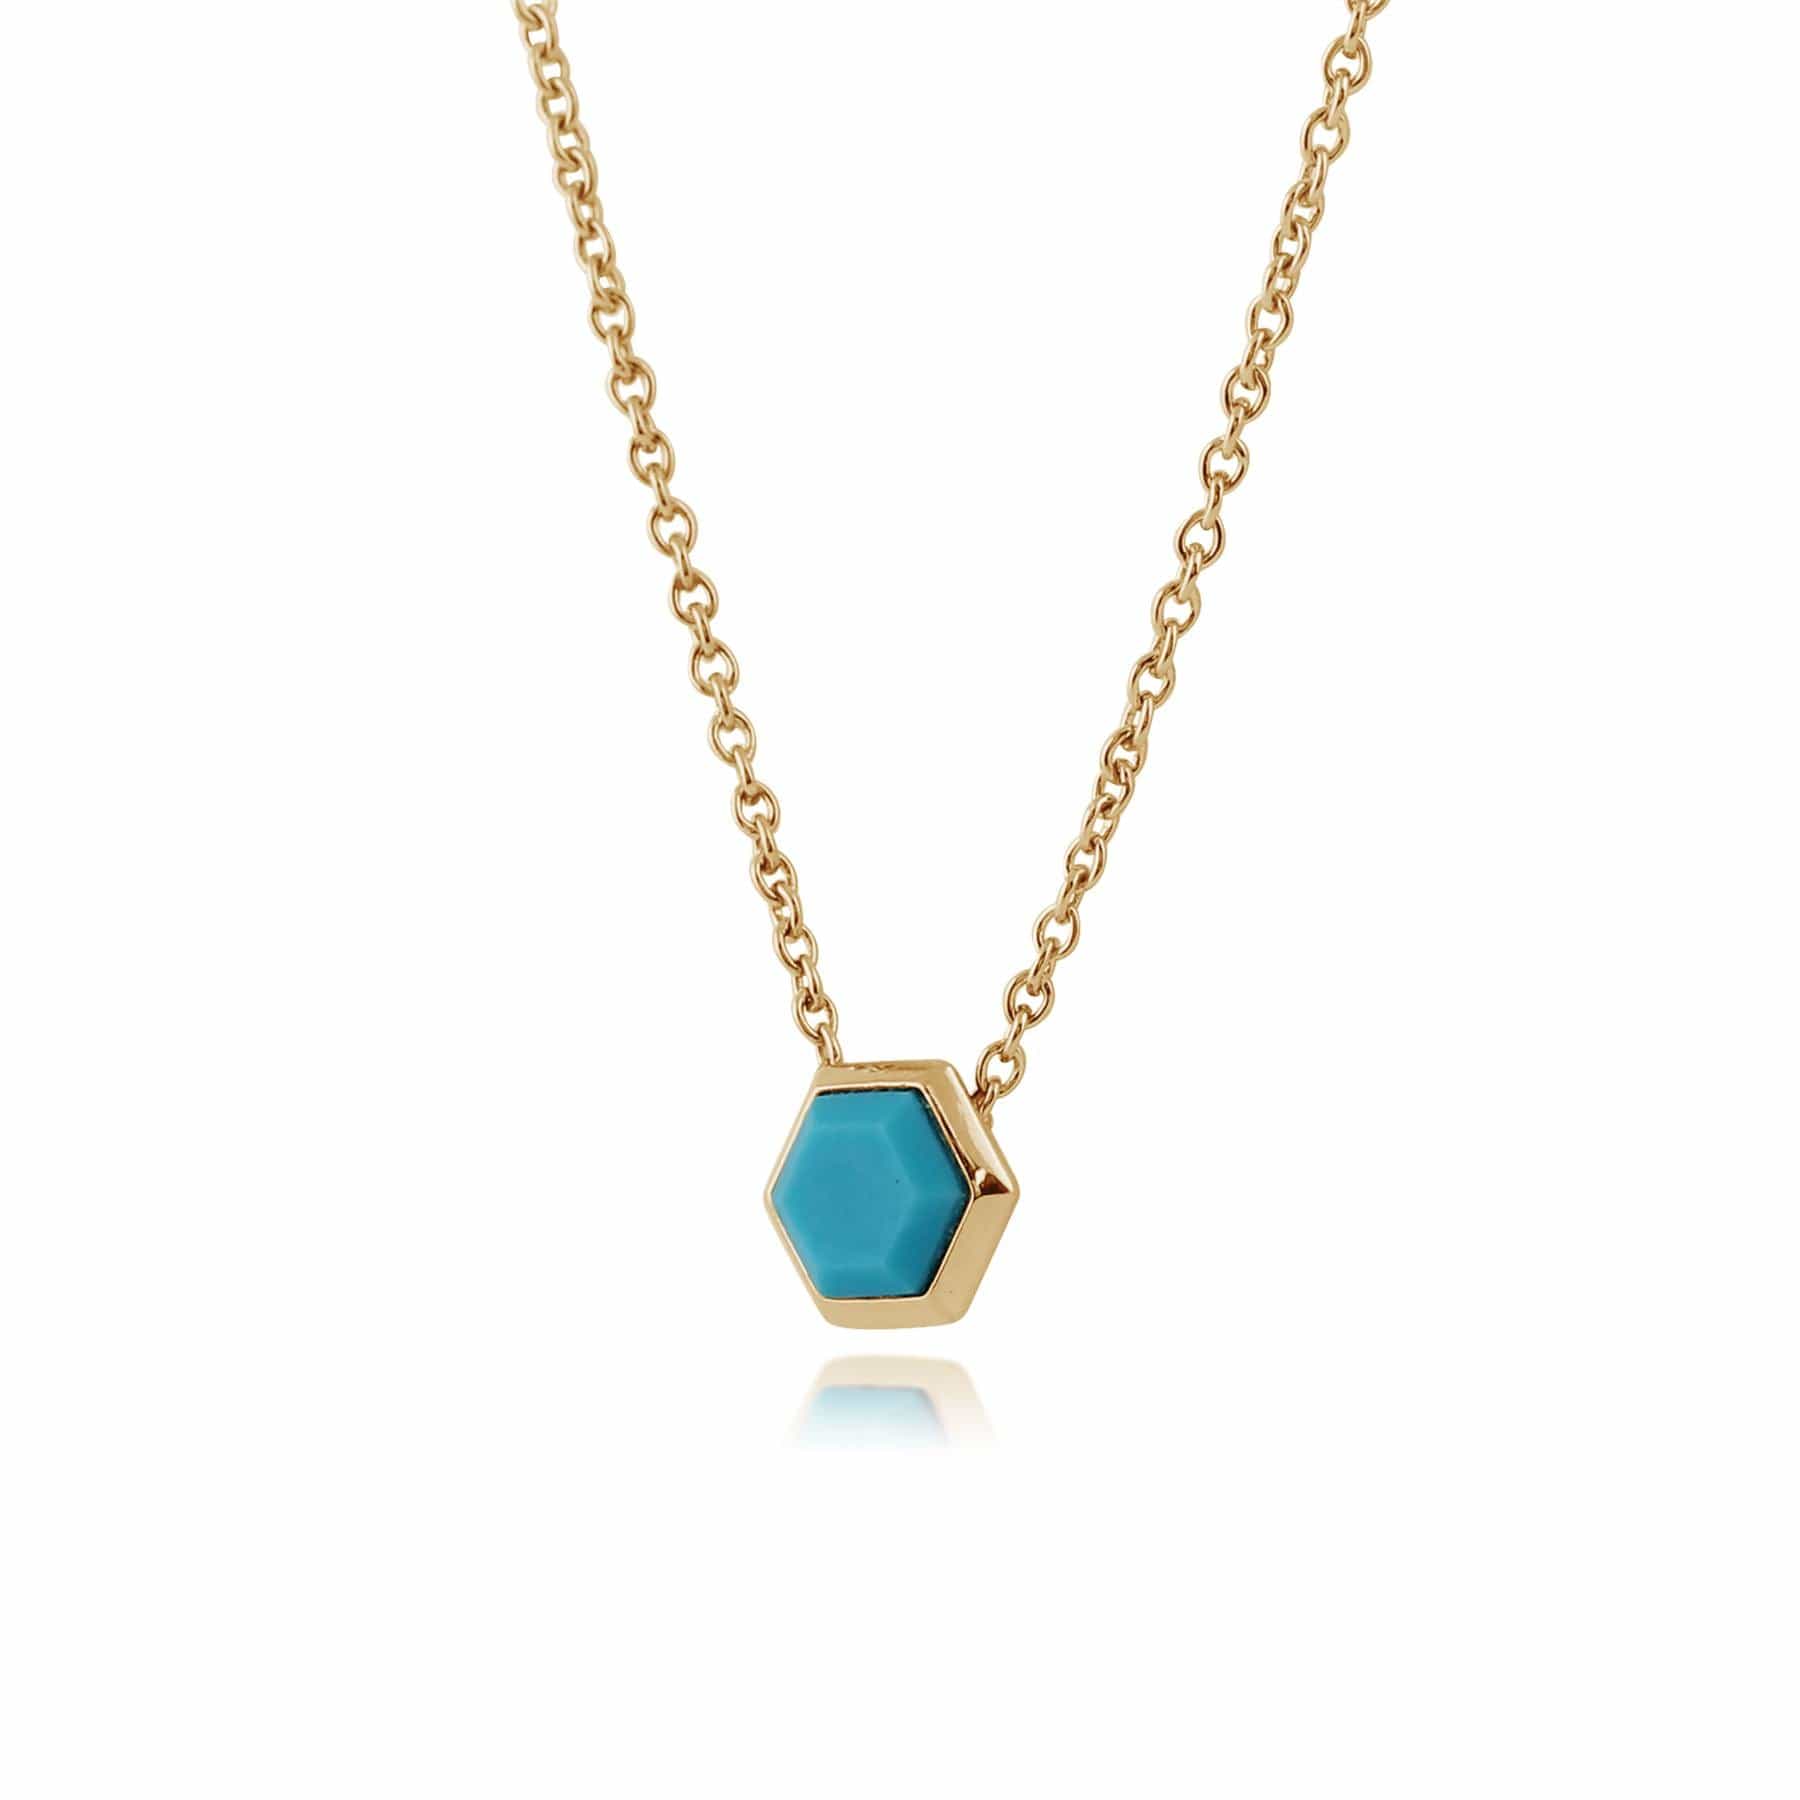 Geometric Hexagon Turquoise Necklace in Gold Plated  Silver